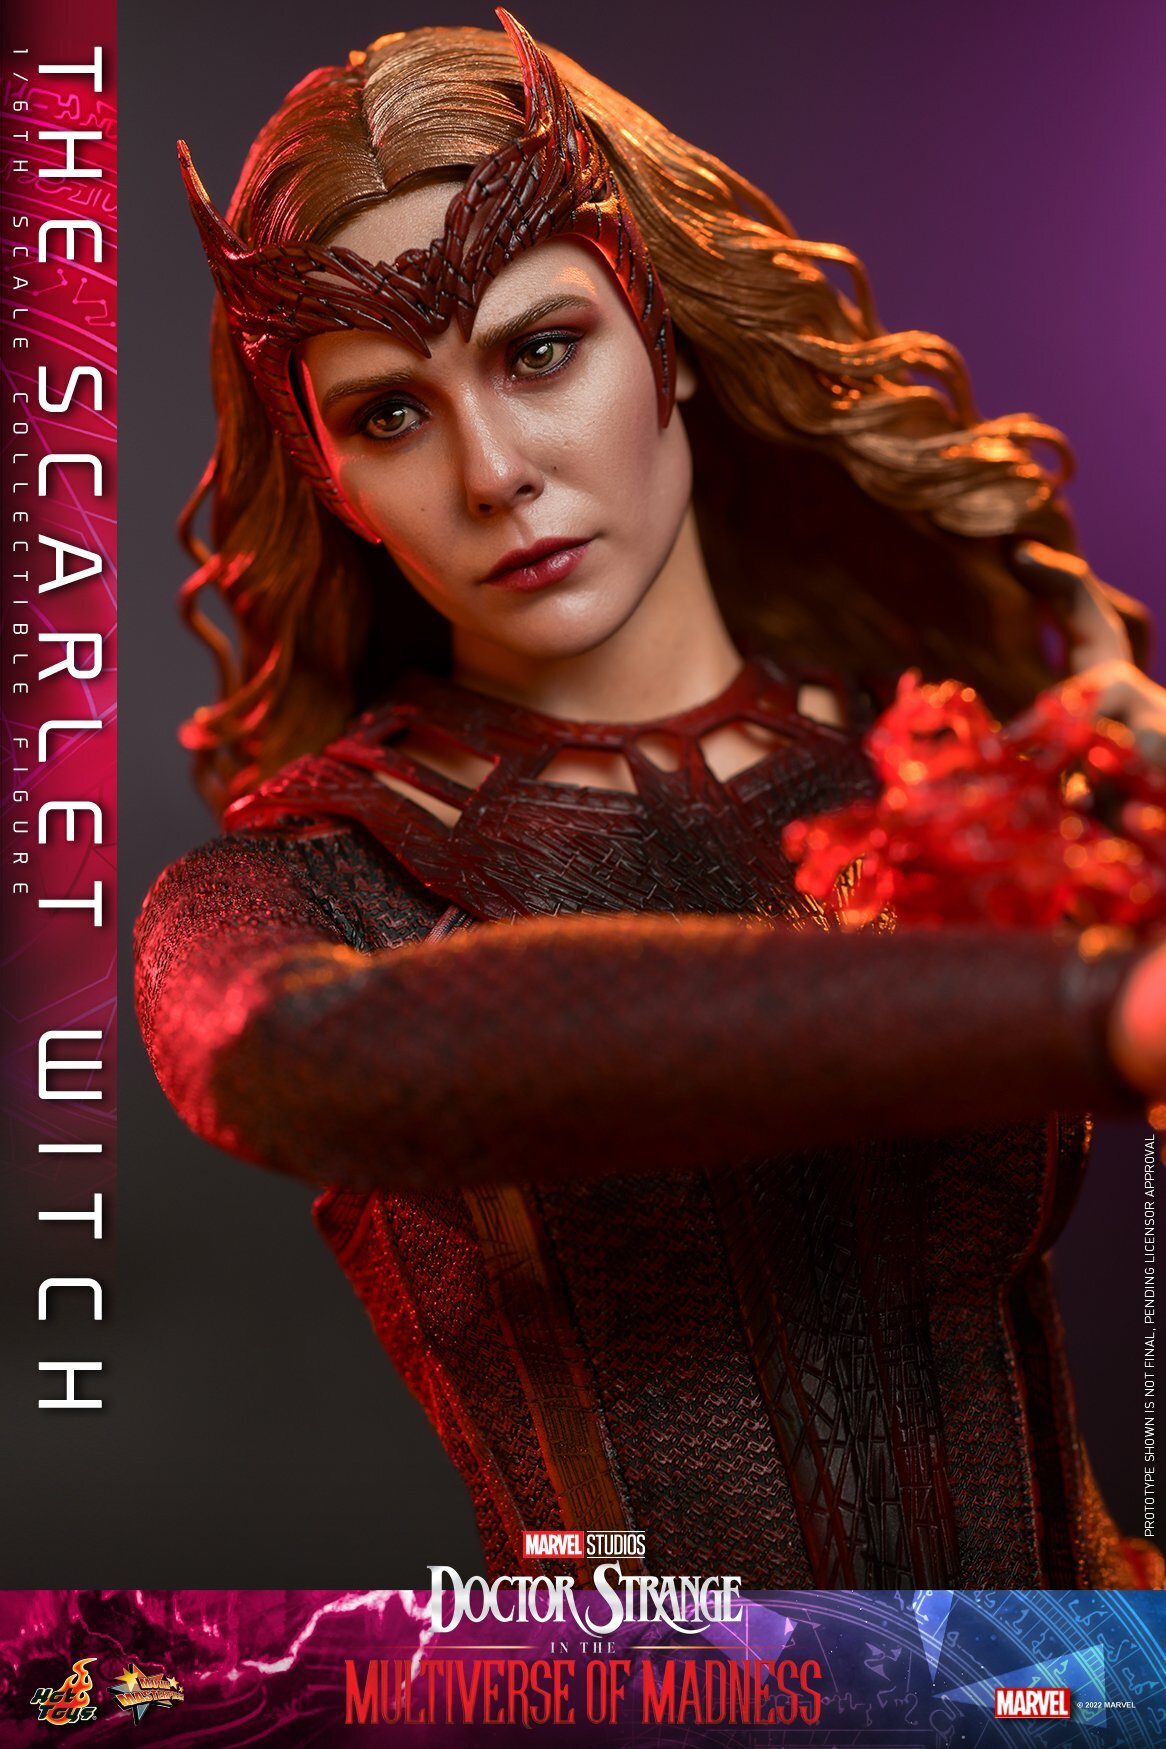 Hot-Toy-Multiverse-of-Madness-Scarlet-Witch-010.jpg.3a6eaa50c51b70e21aad78aed257acfe.jpg